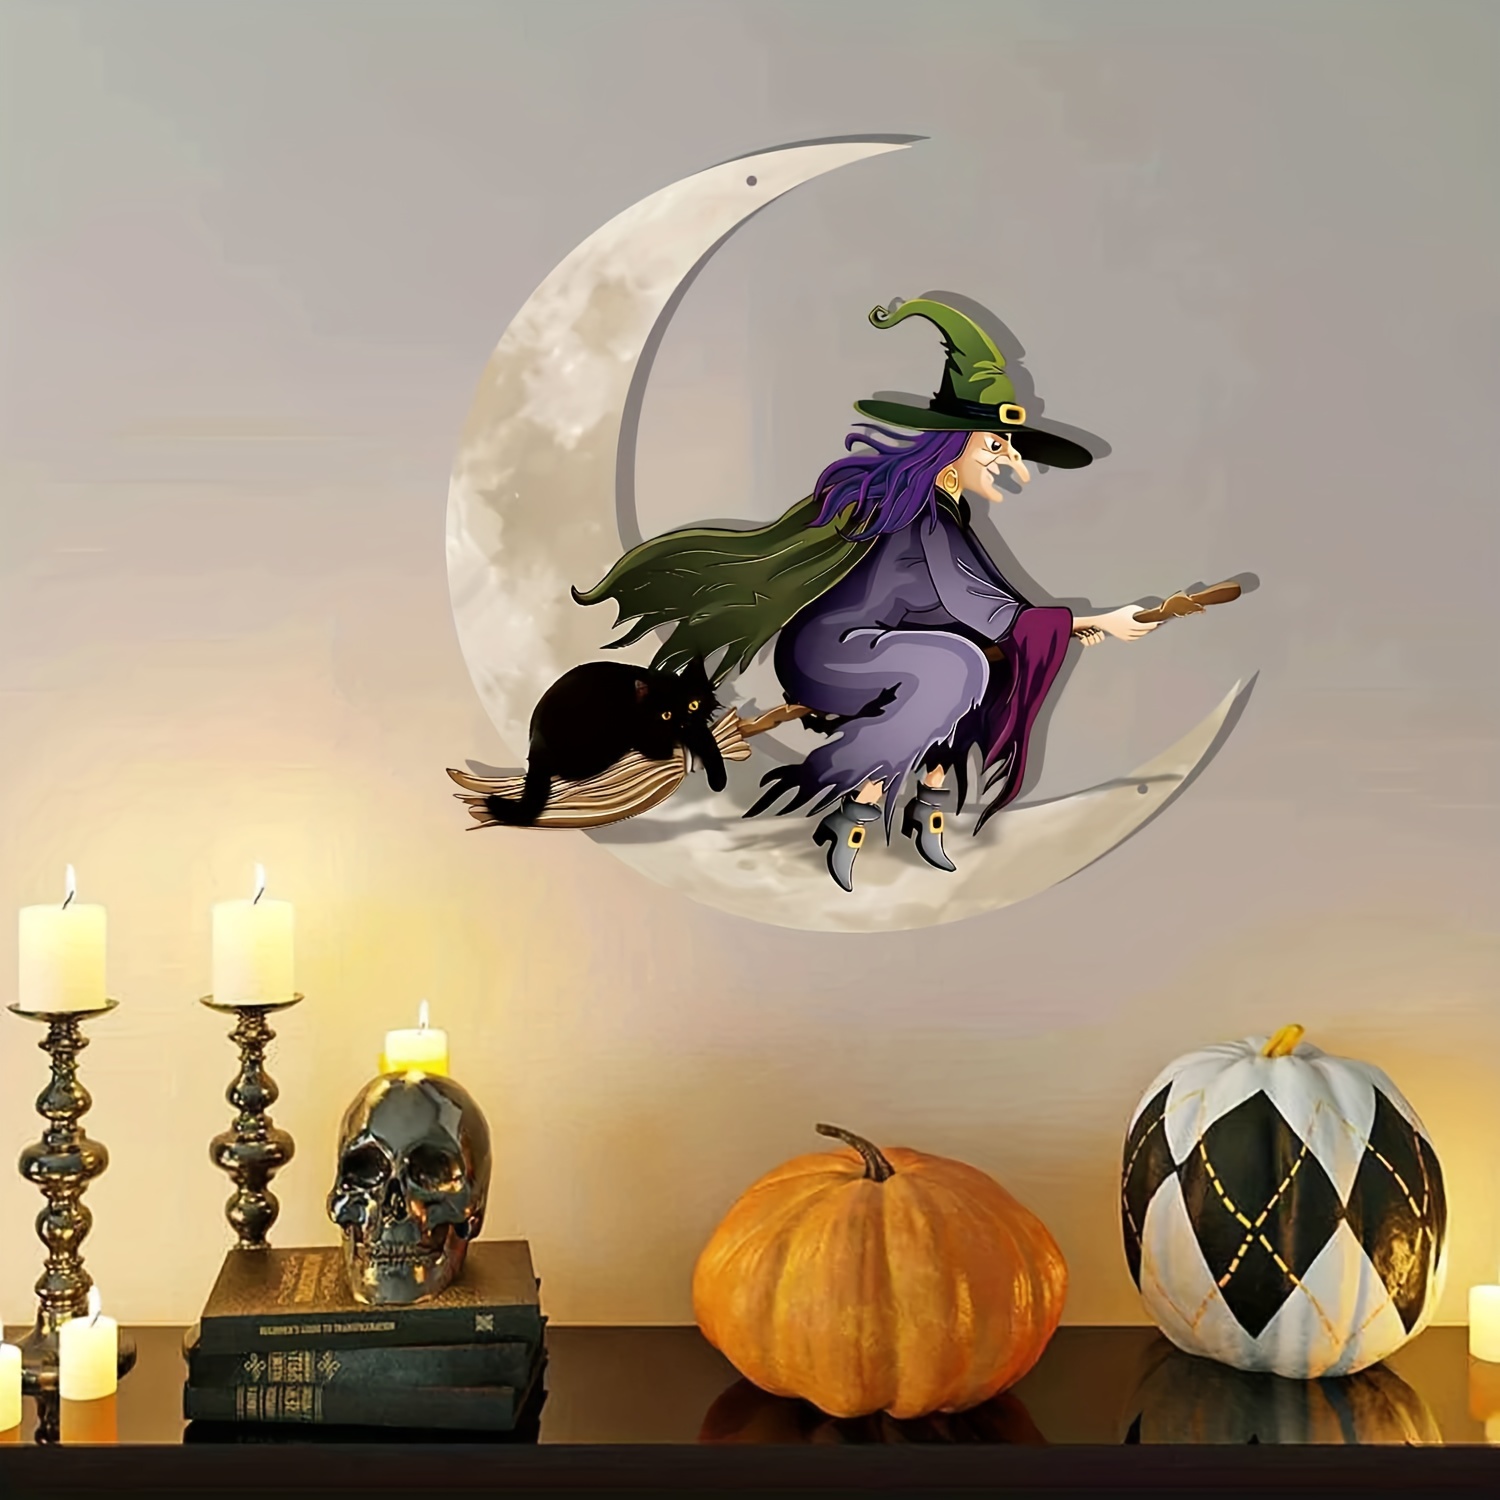 Happy Halloween Decor, Witch, Witch Silhouette Round Wall